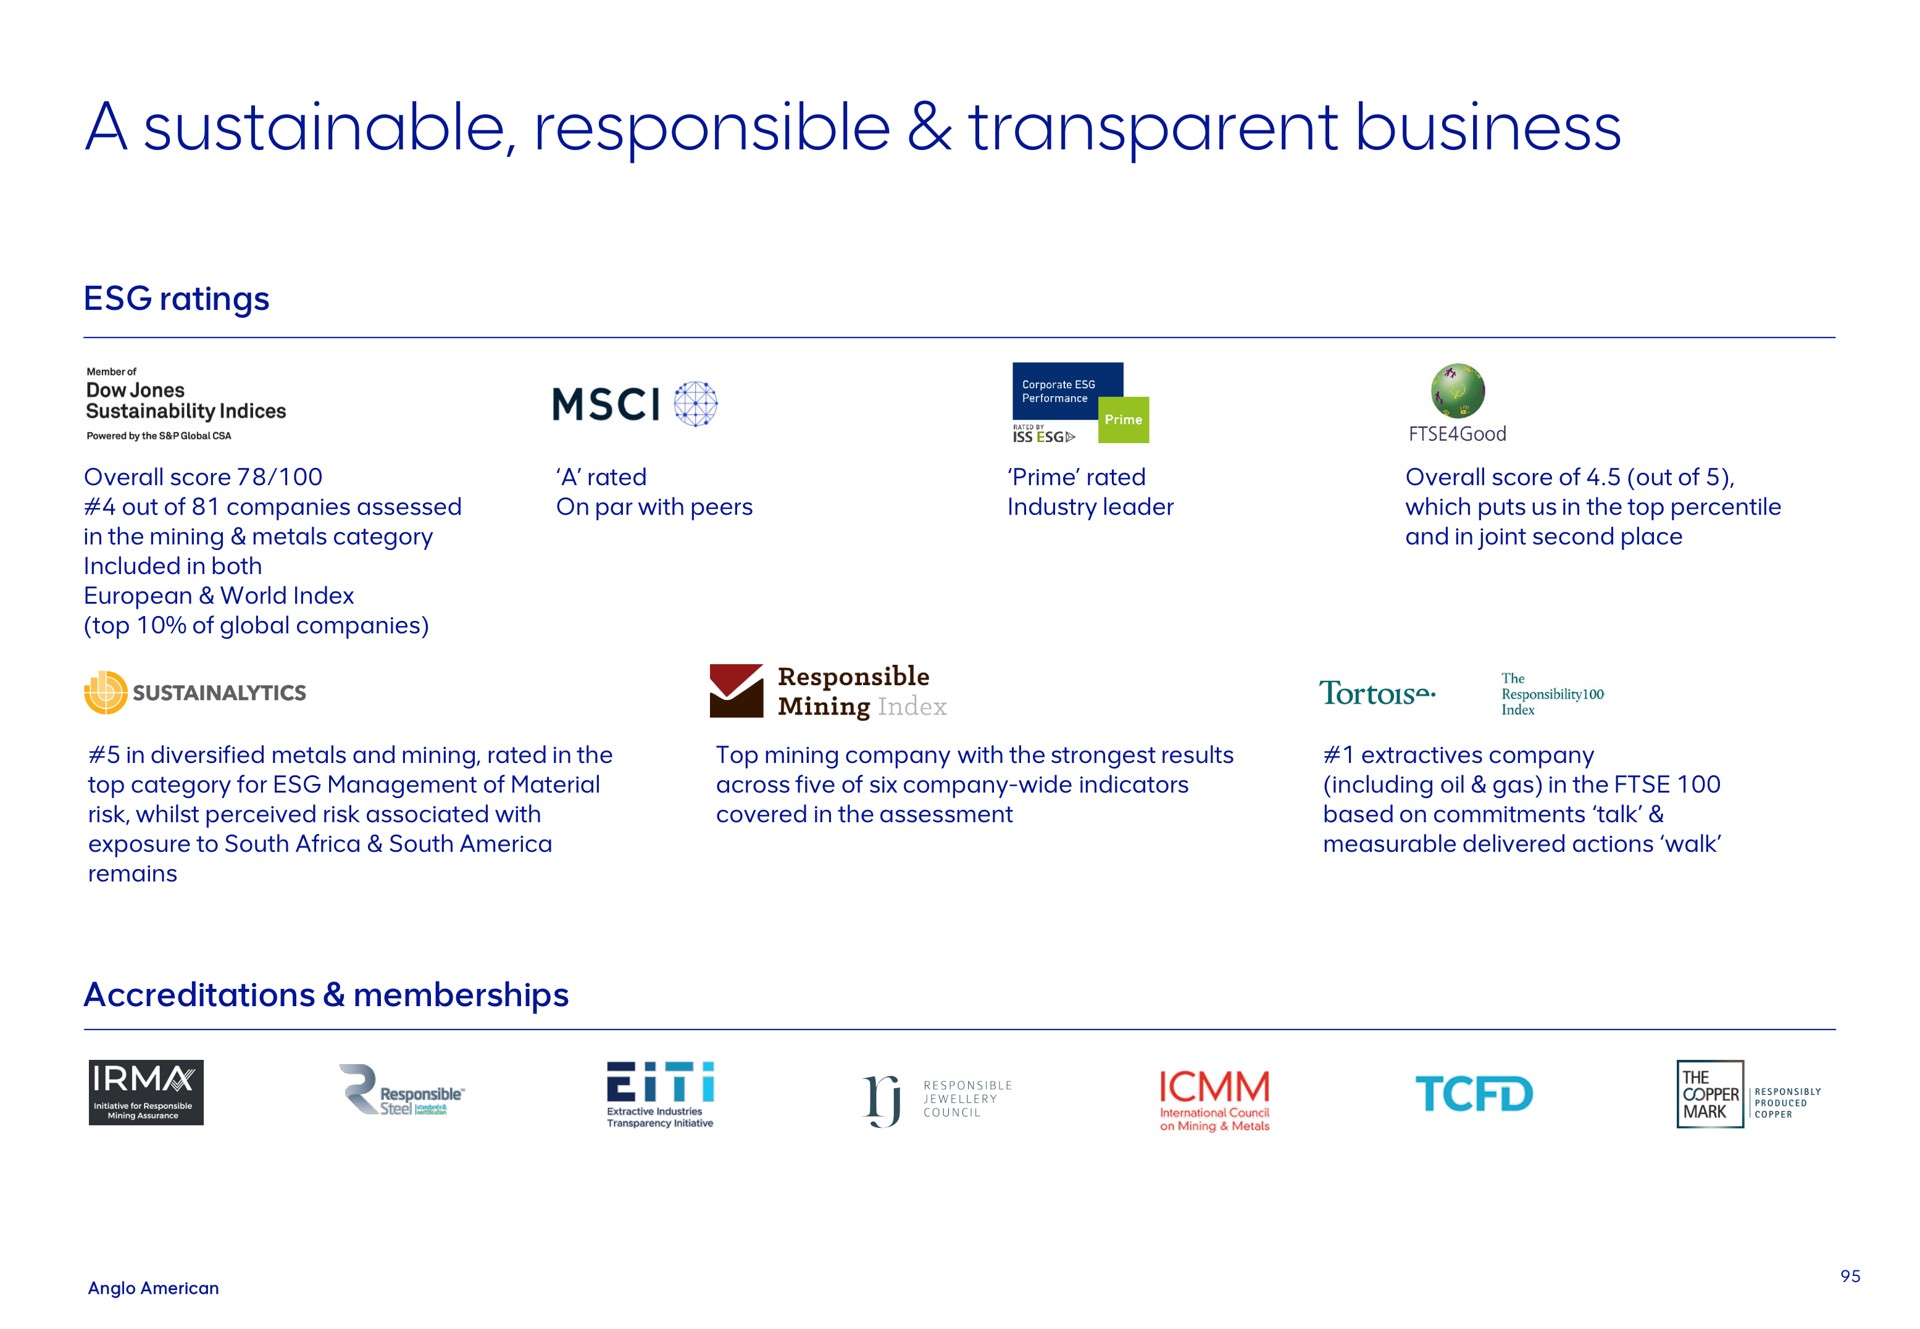 a sustainable responsible transparent business ratings member of dow indices powered by the global overall score out of companies assessed mining metals category included in both world index top of global companies rated on par with peers eer emit rated iss in prime rated industry leader good overall score of out of which puts us in the top percentile and in joint second place in diversified metals and mining rated in the top category for management of material risk whilst perceived risk associated with exposure to south south remains accreditations memberships industries transparency steel mining top mining company with the results across five of six company wide indicators covered in the assessment company including oil gas in the based on commitments talk measurable delivered actions walk i international council on mining metals the copper responsibly mark | AngloAmerican